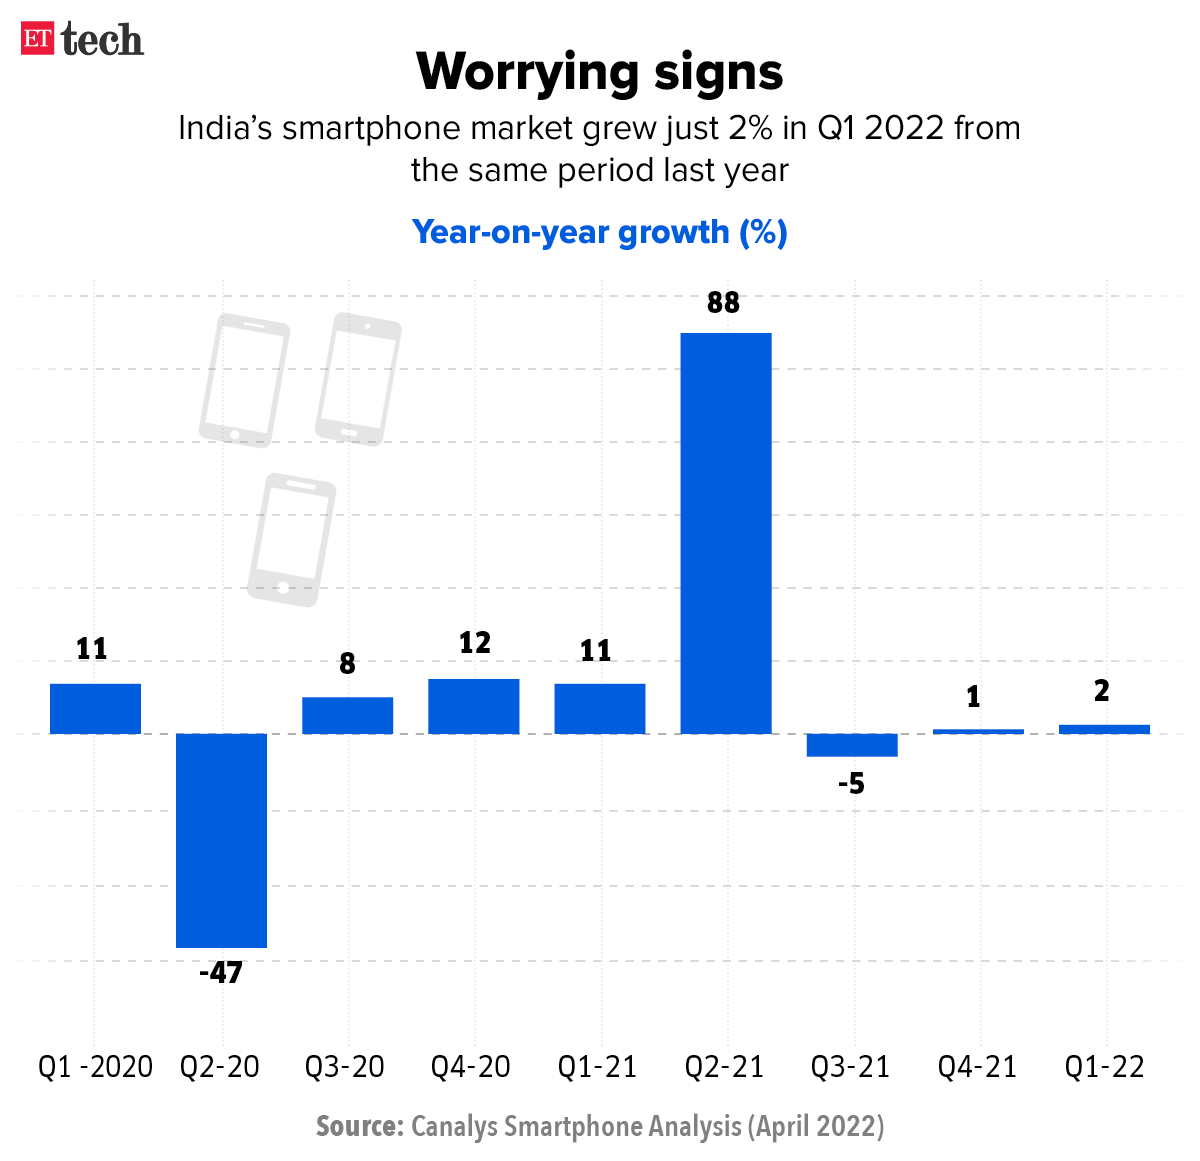 Worrying signs